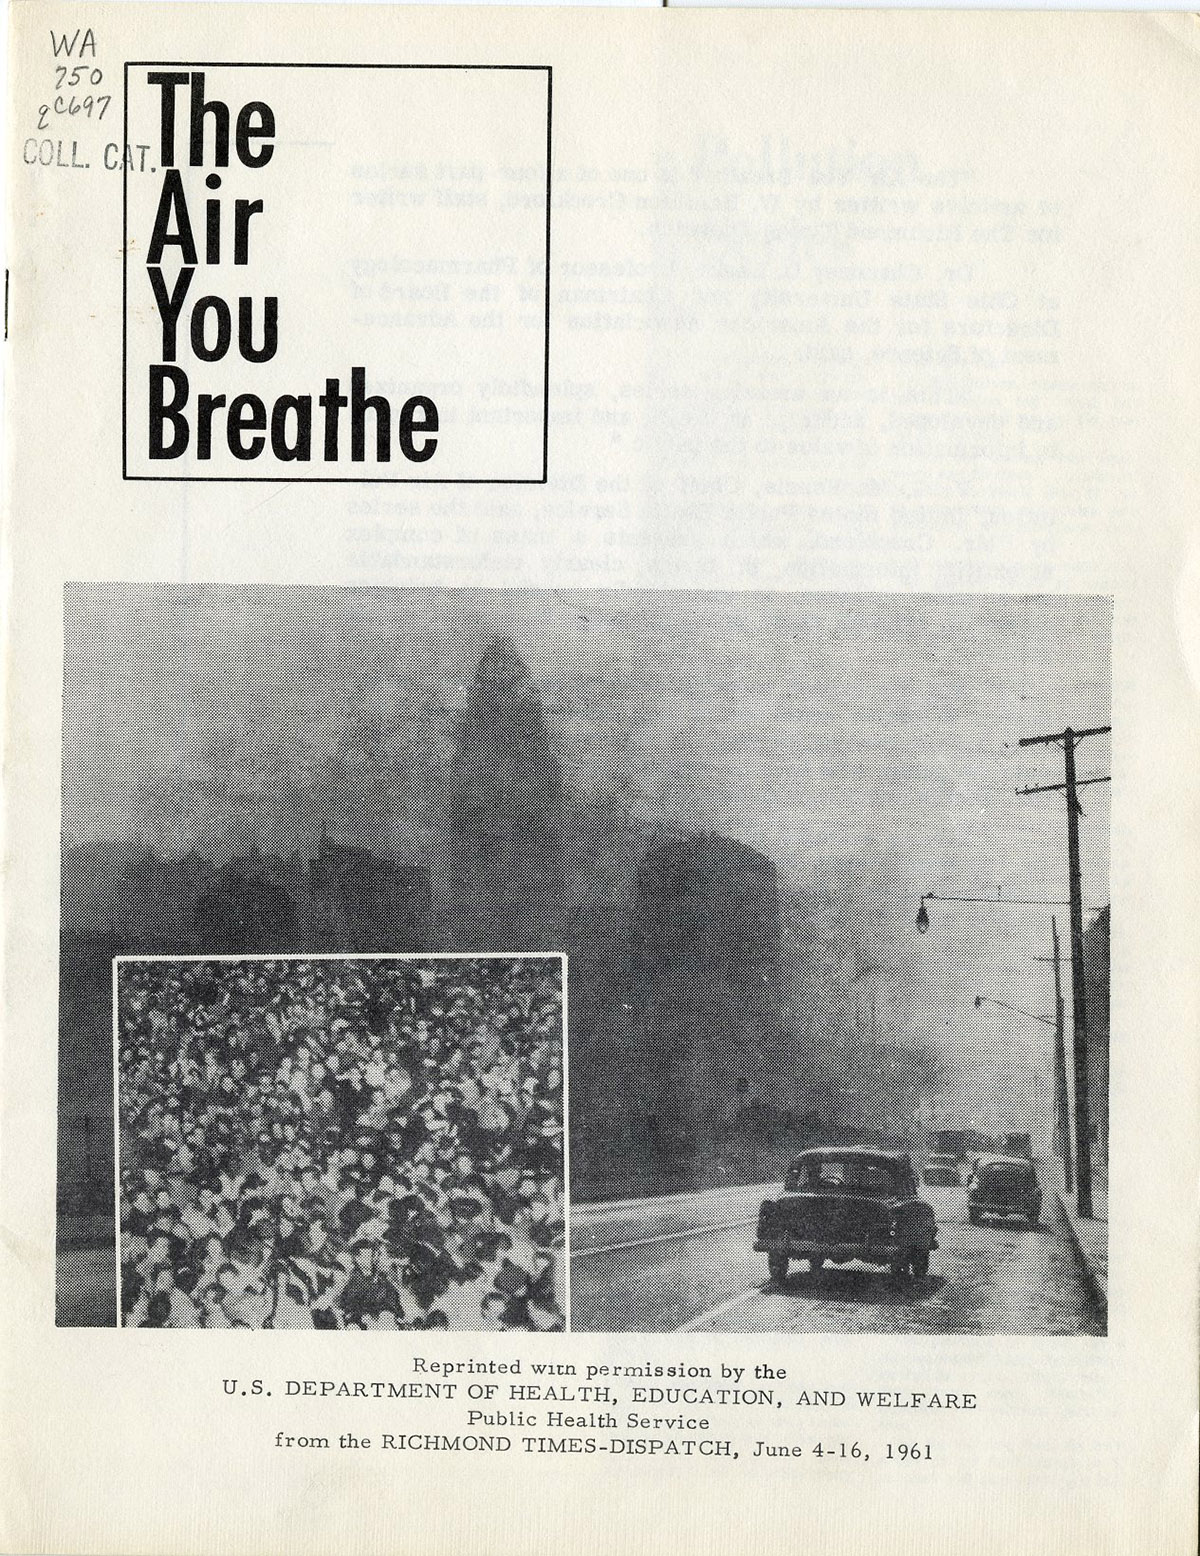 A book cover with an image of a foggy urban street and another image of a crowd seen from a bird's-eye view.